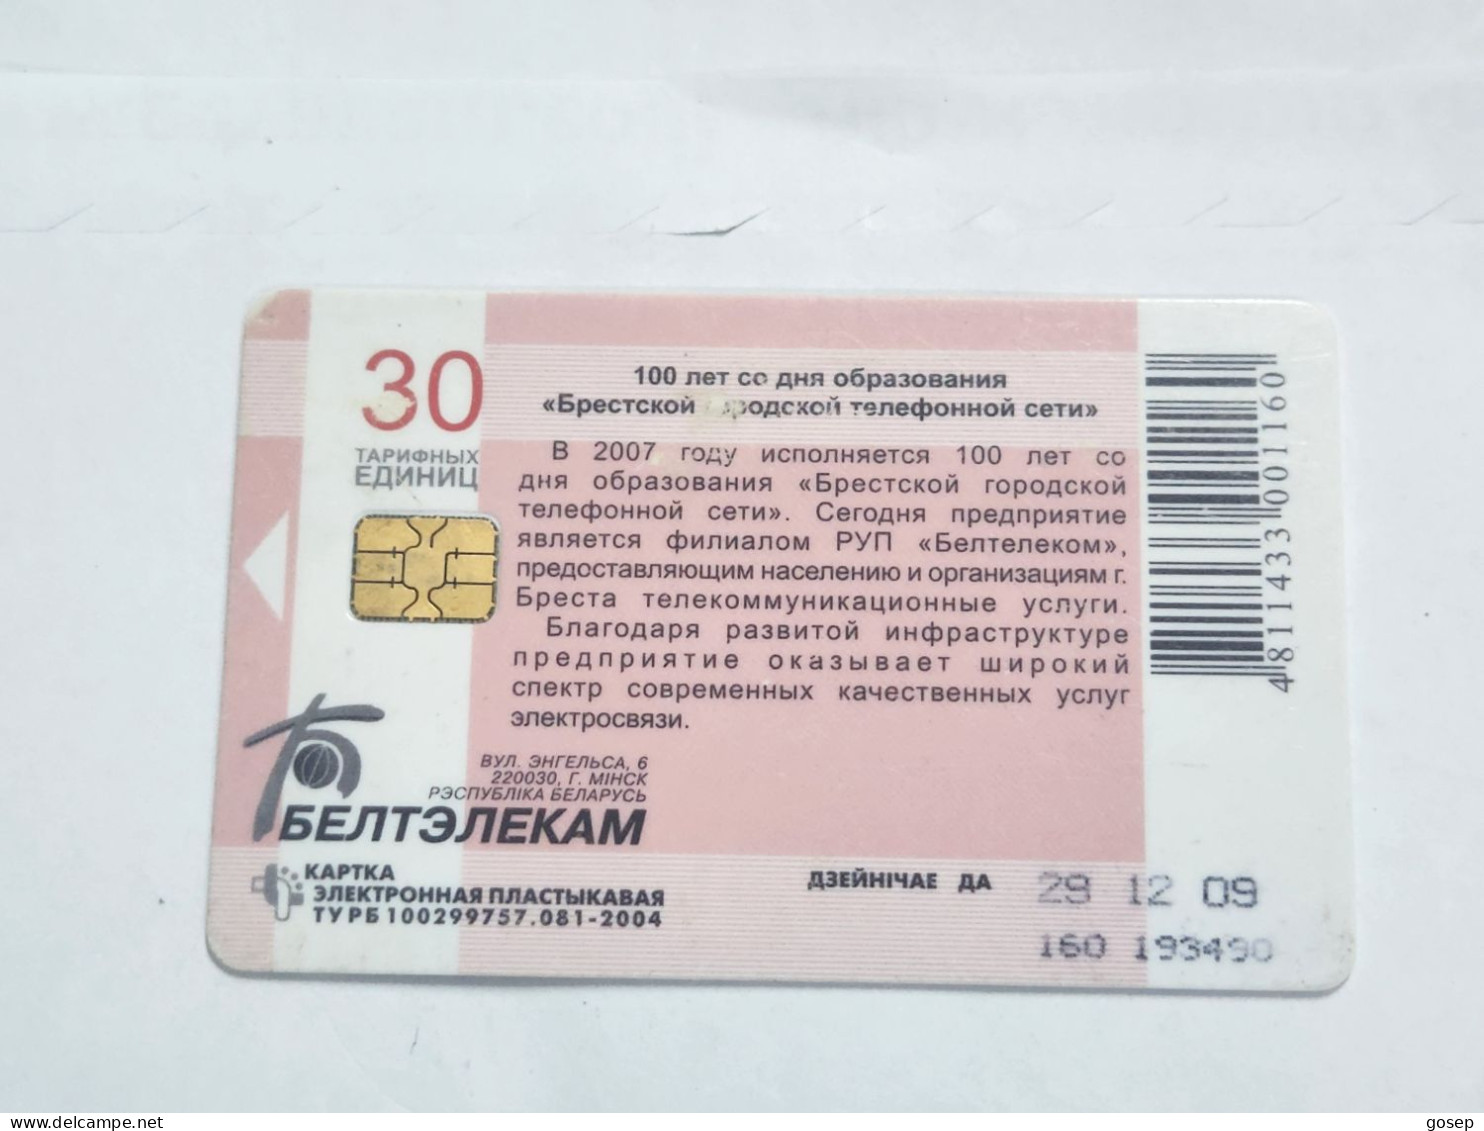 BELARUS-(BY-BLT-160)-100 Anniversary Of Brest-(135)(GOLD CHIP)(193490)(tirage-235.000)-used Card+1card Prepiad Free - Belarus